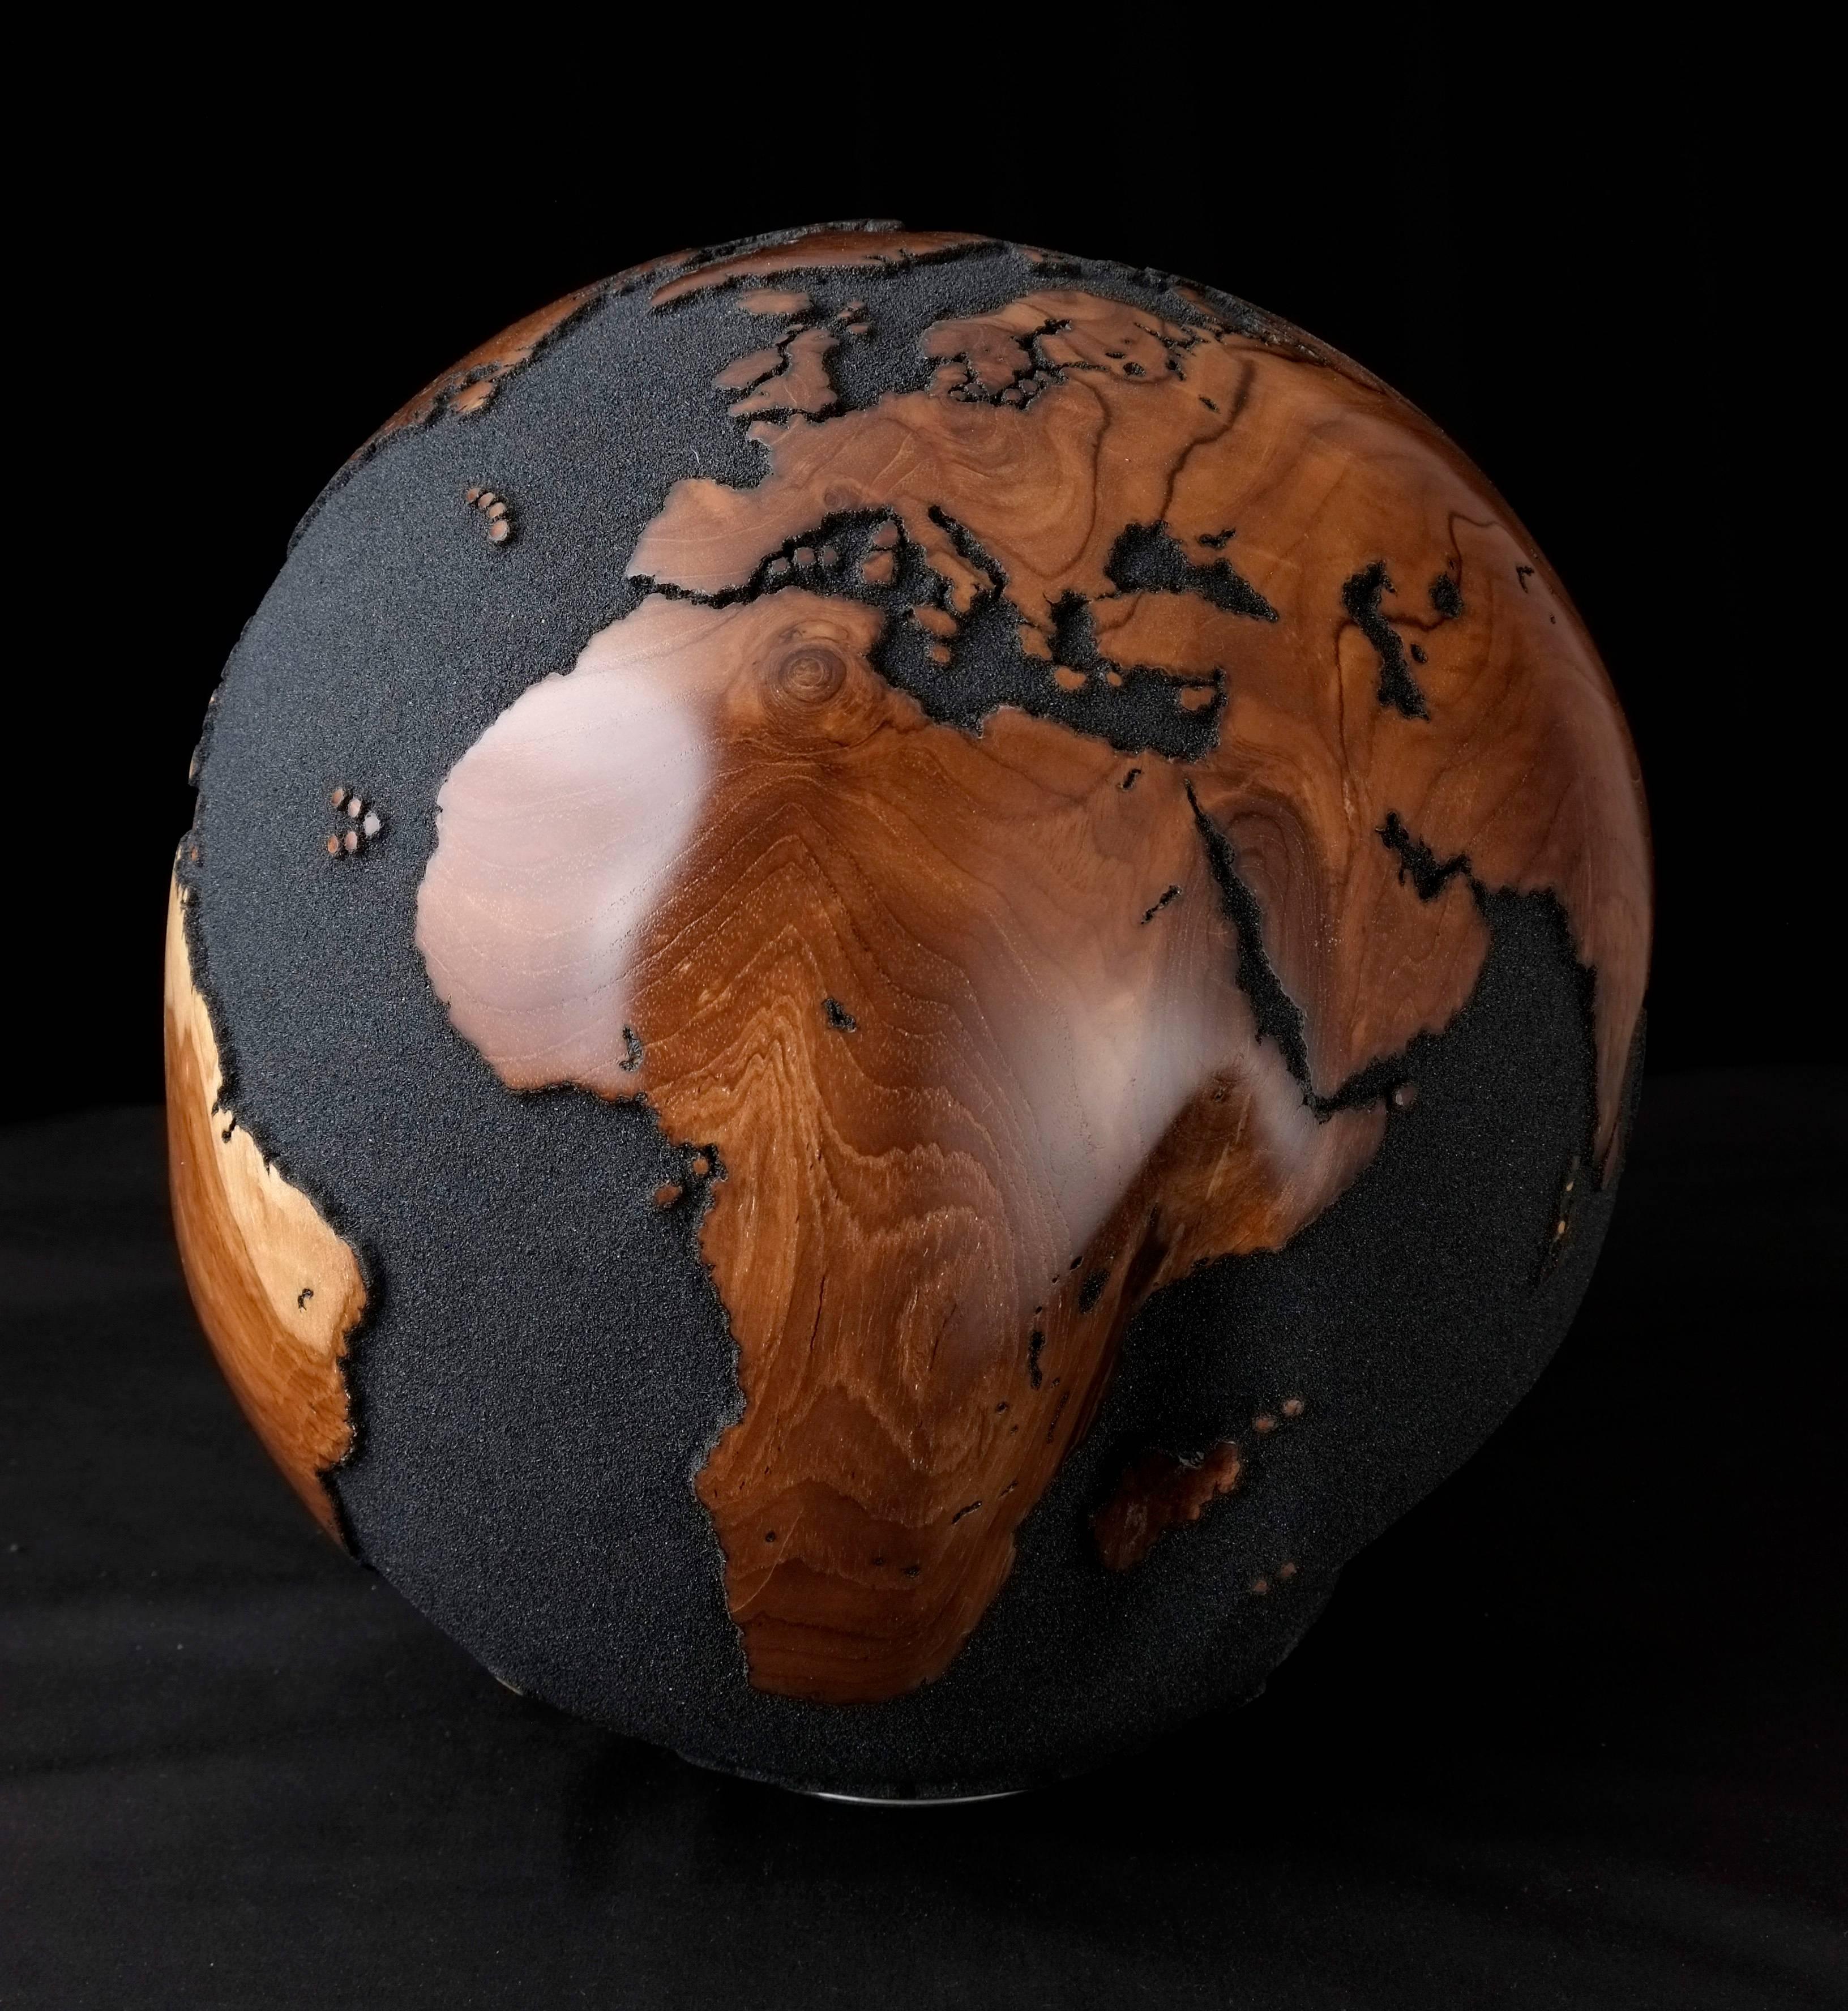 Magnificent wooden globe made of hand-carved teak root, with natural holes in volcanic sand finishing.
This engaging piece will definitely be the focal point in any decor setup. 

Dimension: 11.81 In / 30 cm
Materials: Reclaimed teak root, volcanic